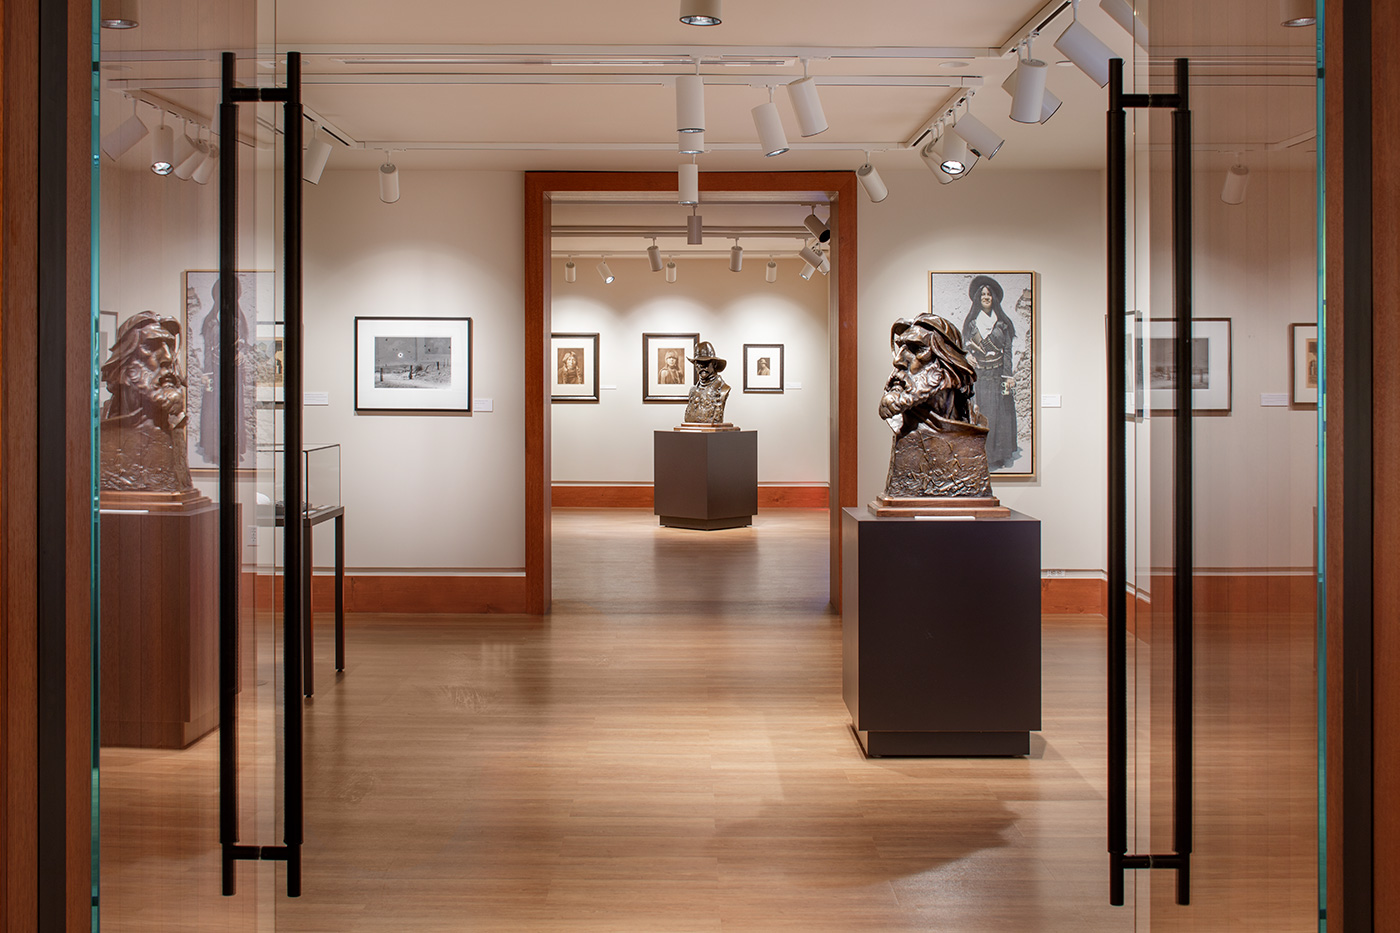 Wood colored bight exhibit rooms with two bronze busts.